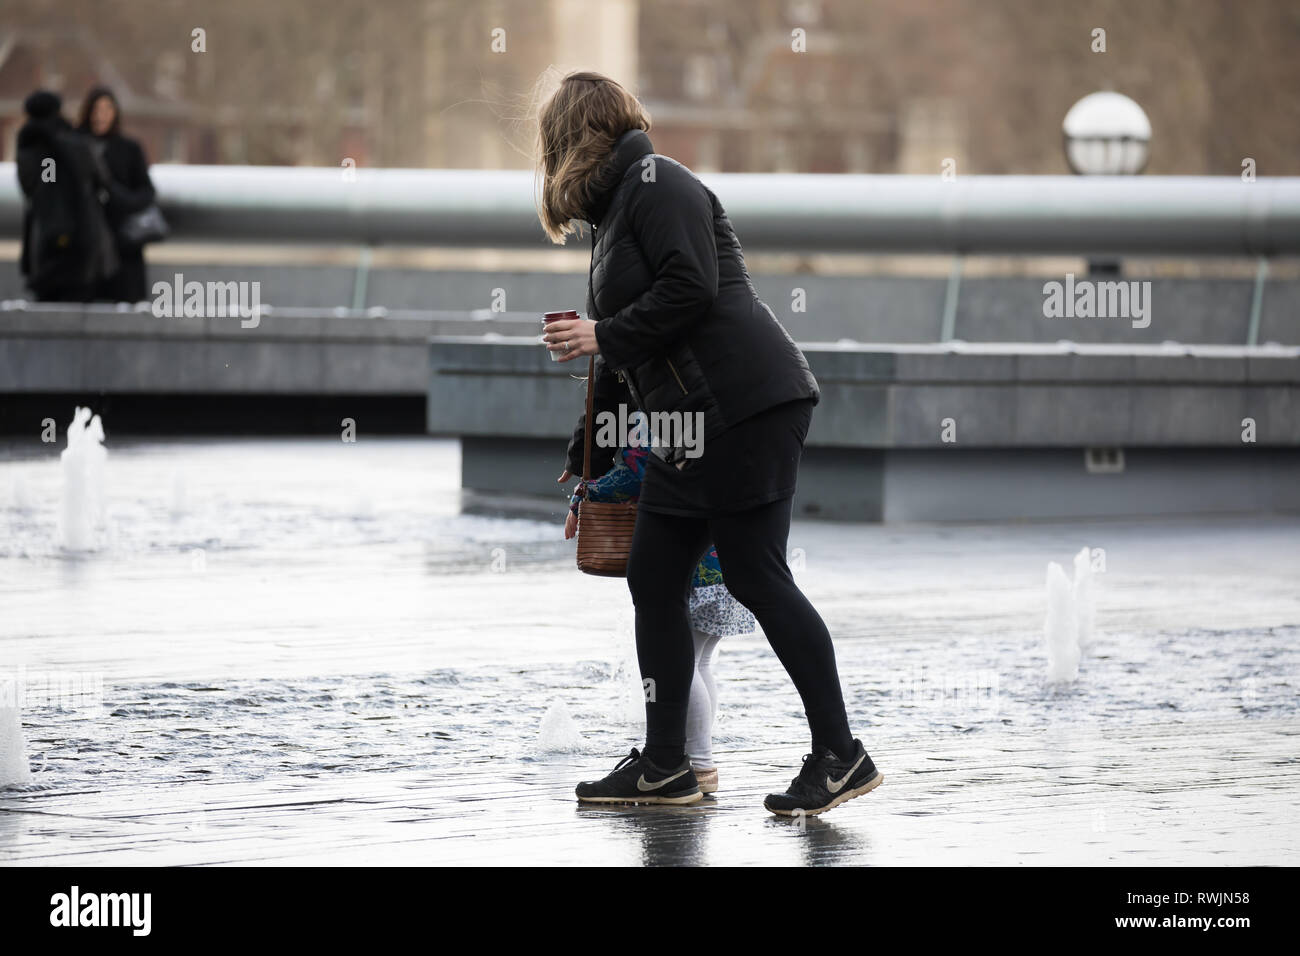 London, UK. 7th Mar, 2019. People walk along the Queenswalk in London enjoying the sunshine and River views. Strong winds are forecast for this afternoon in London again. Credit: Keith Larby/Alamy Live News Stock Photo